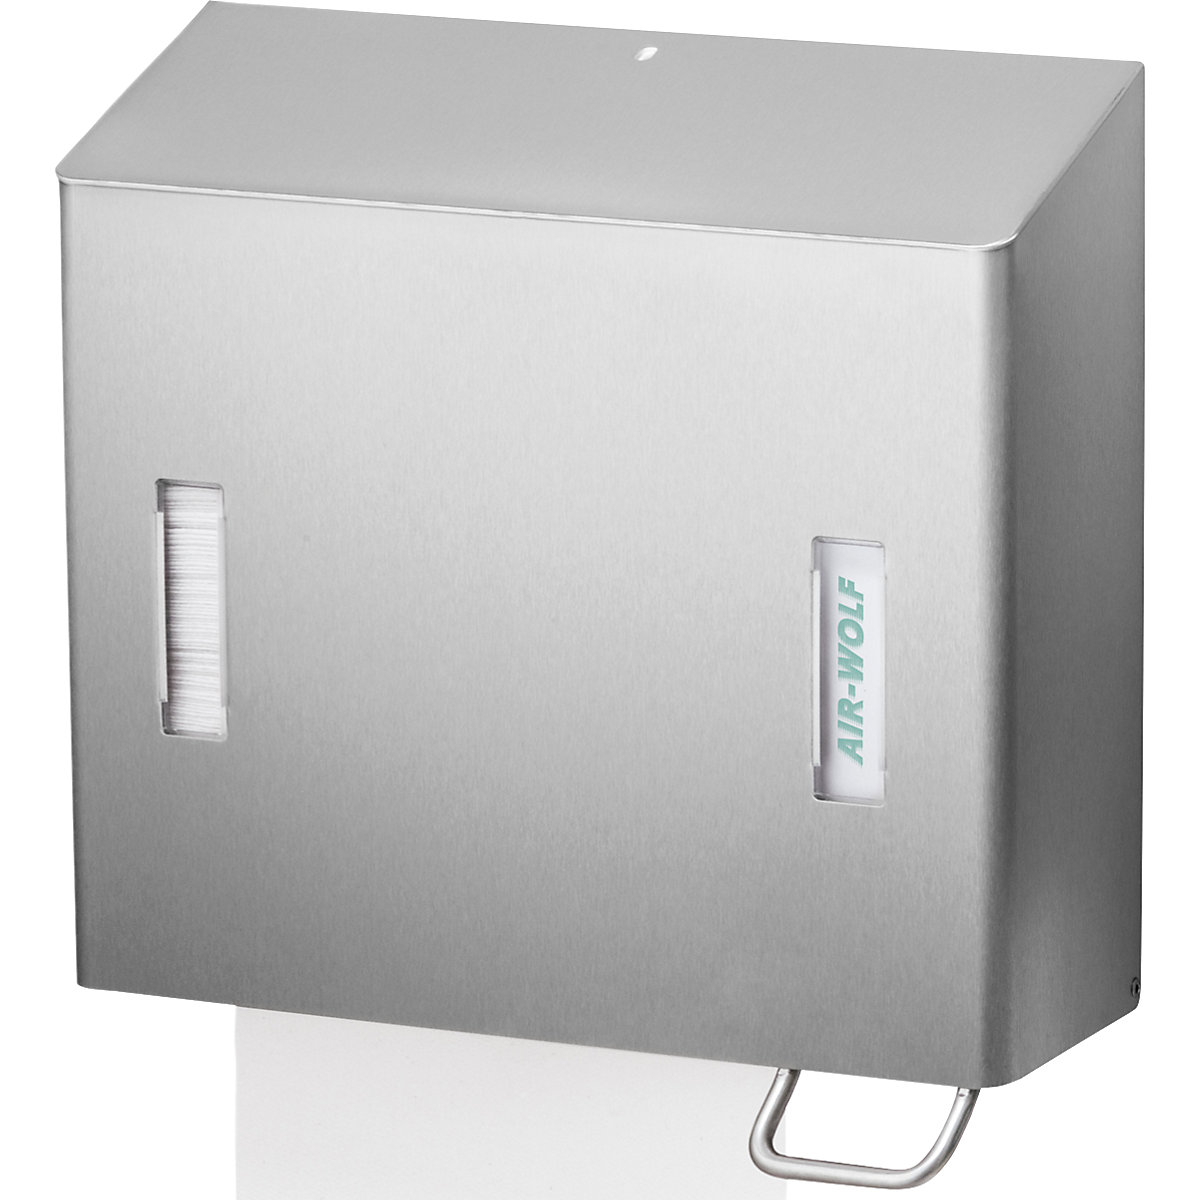 Soap and paper towel dispenser – AIR-WOLF